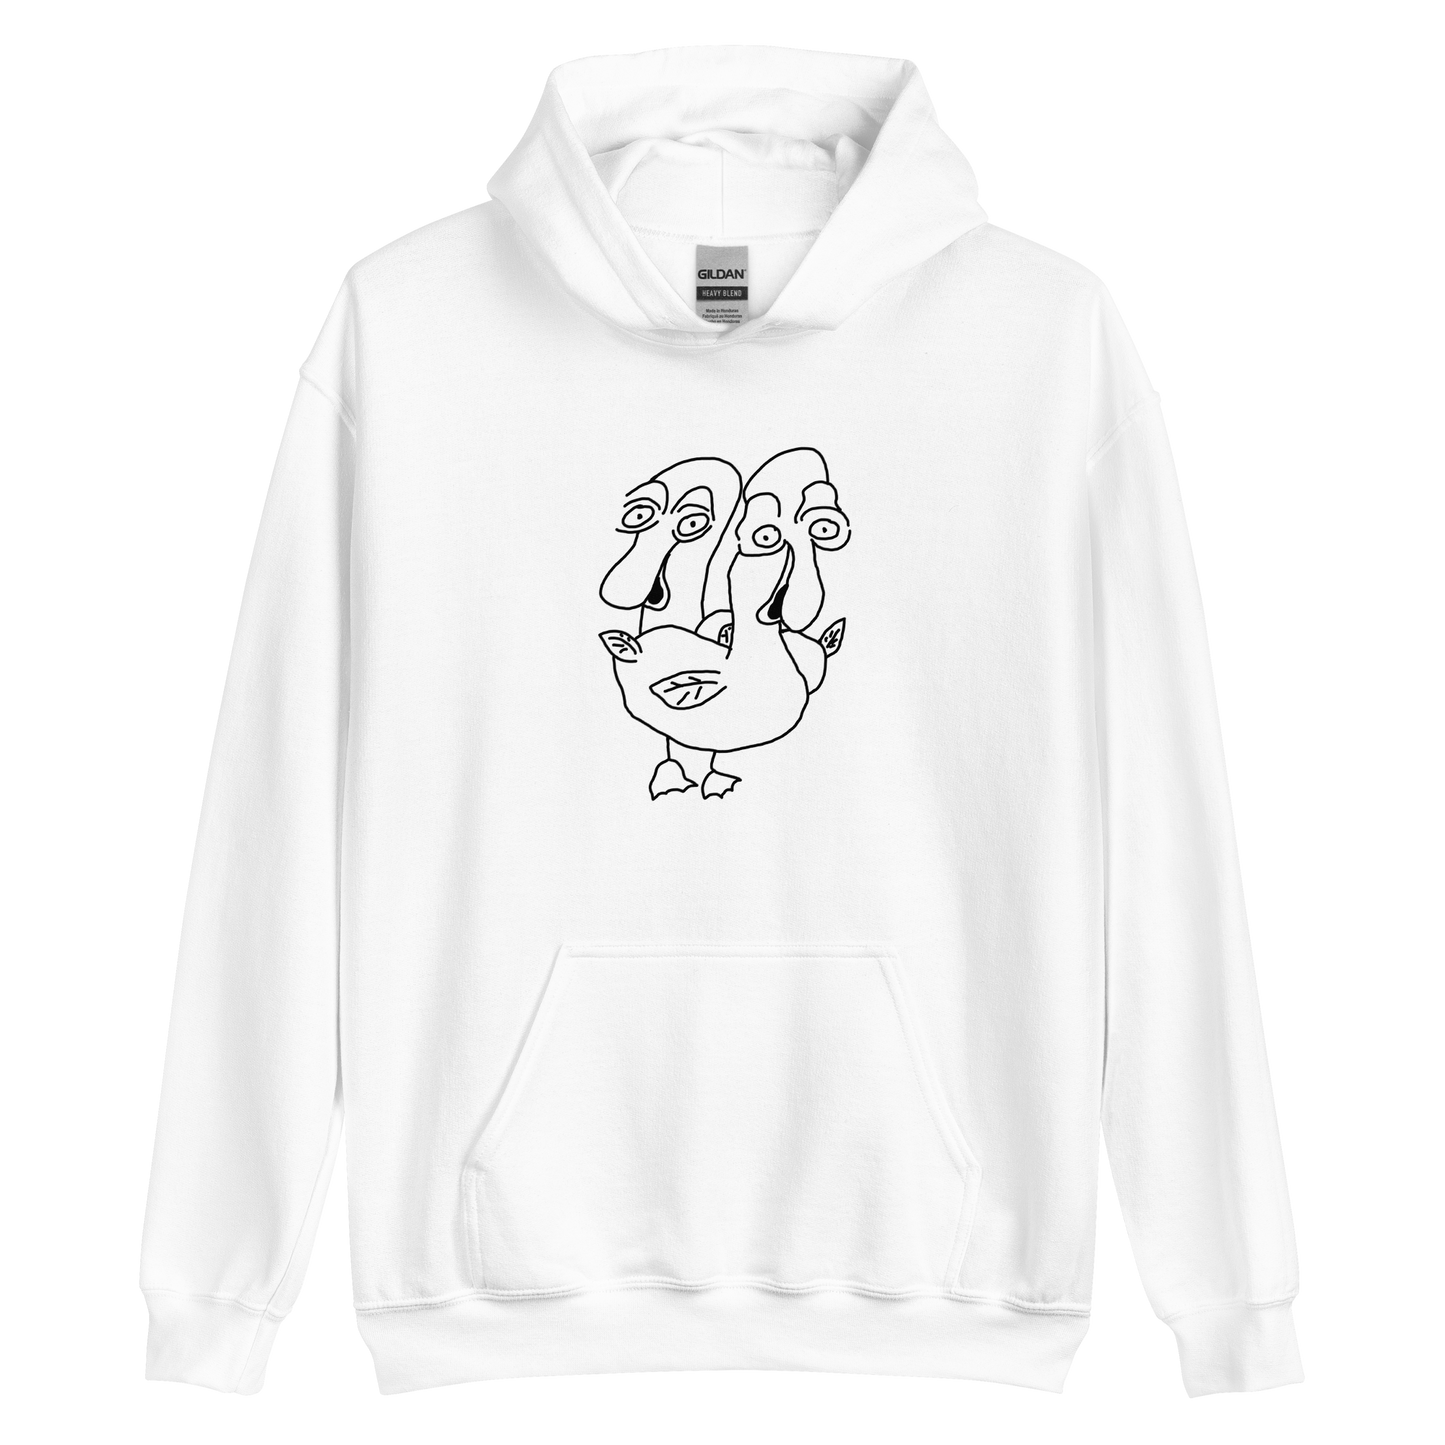 Ducks Fly Together Classic Hoodie